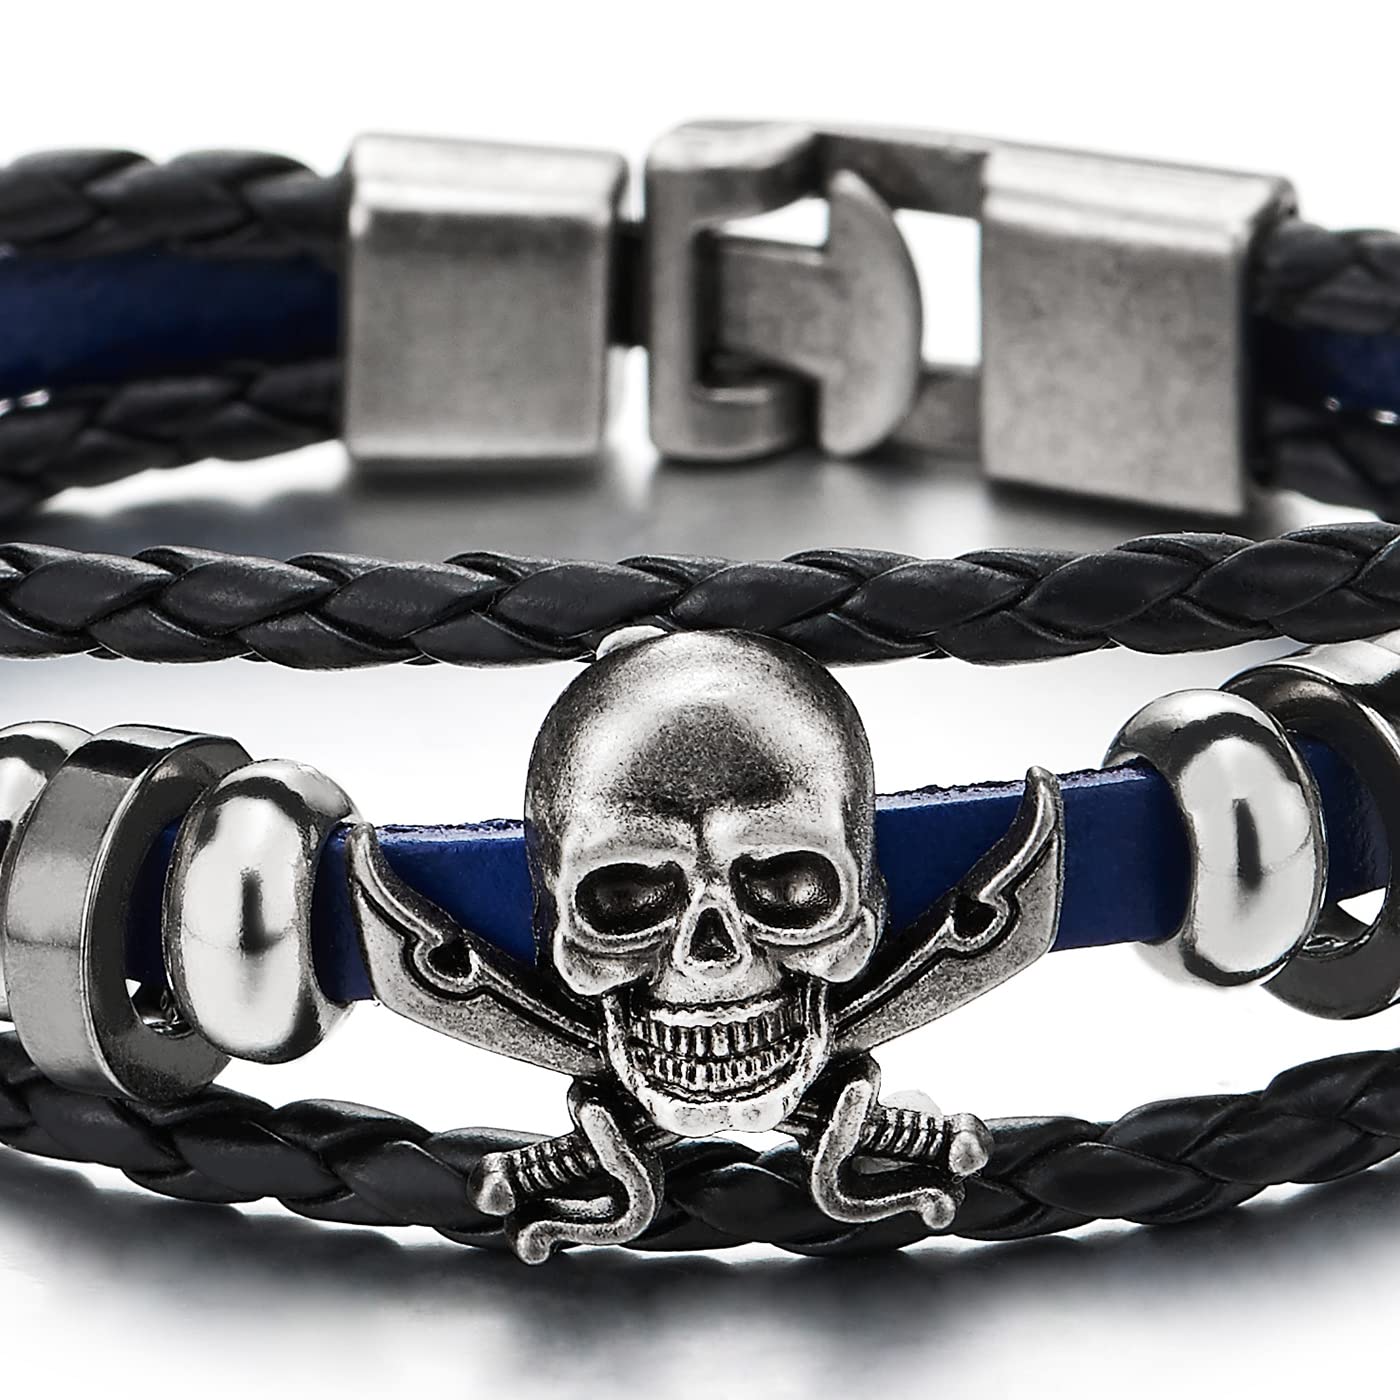 Vintage PU Leather Bracelet with Rivets in Punk style / Cool Bracelets with  Alloy Circle for Biker